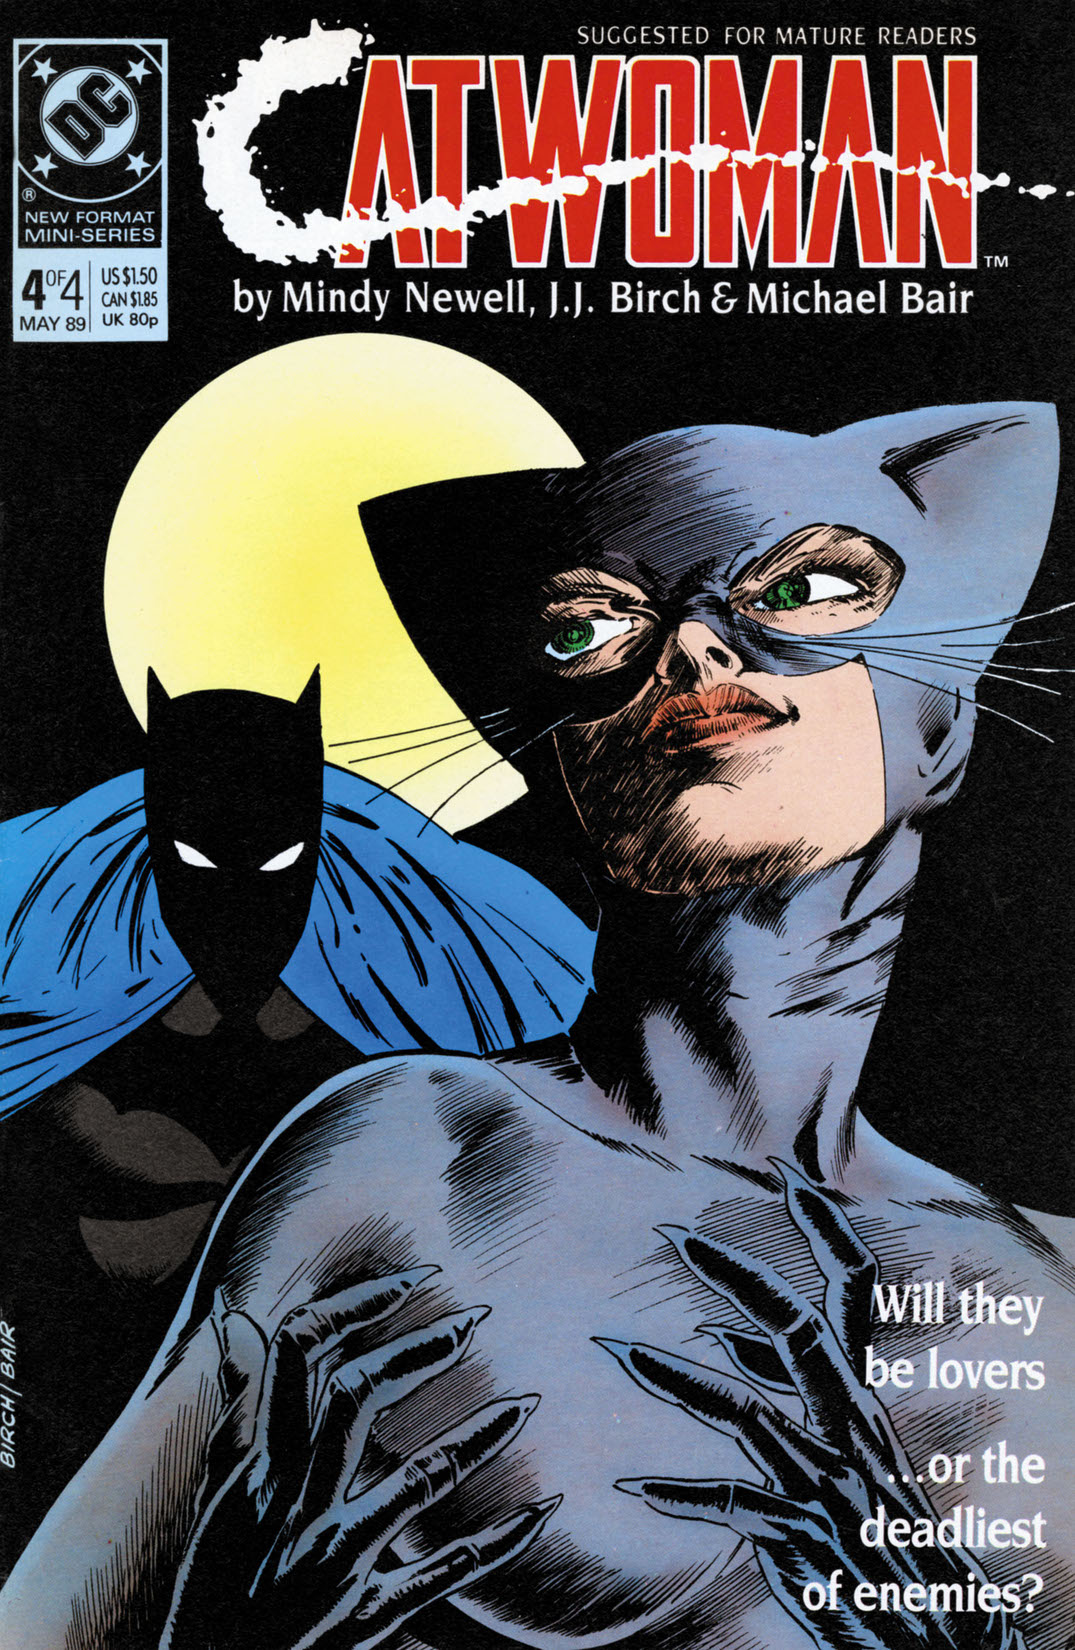 Catwoman (1988-) #4 preview images